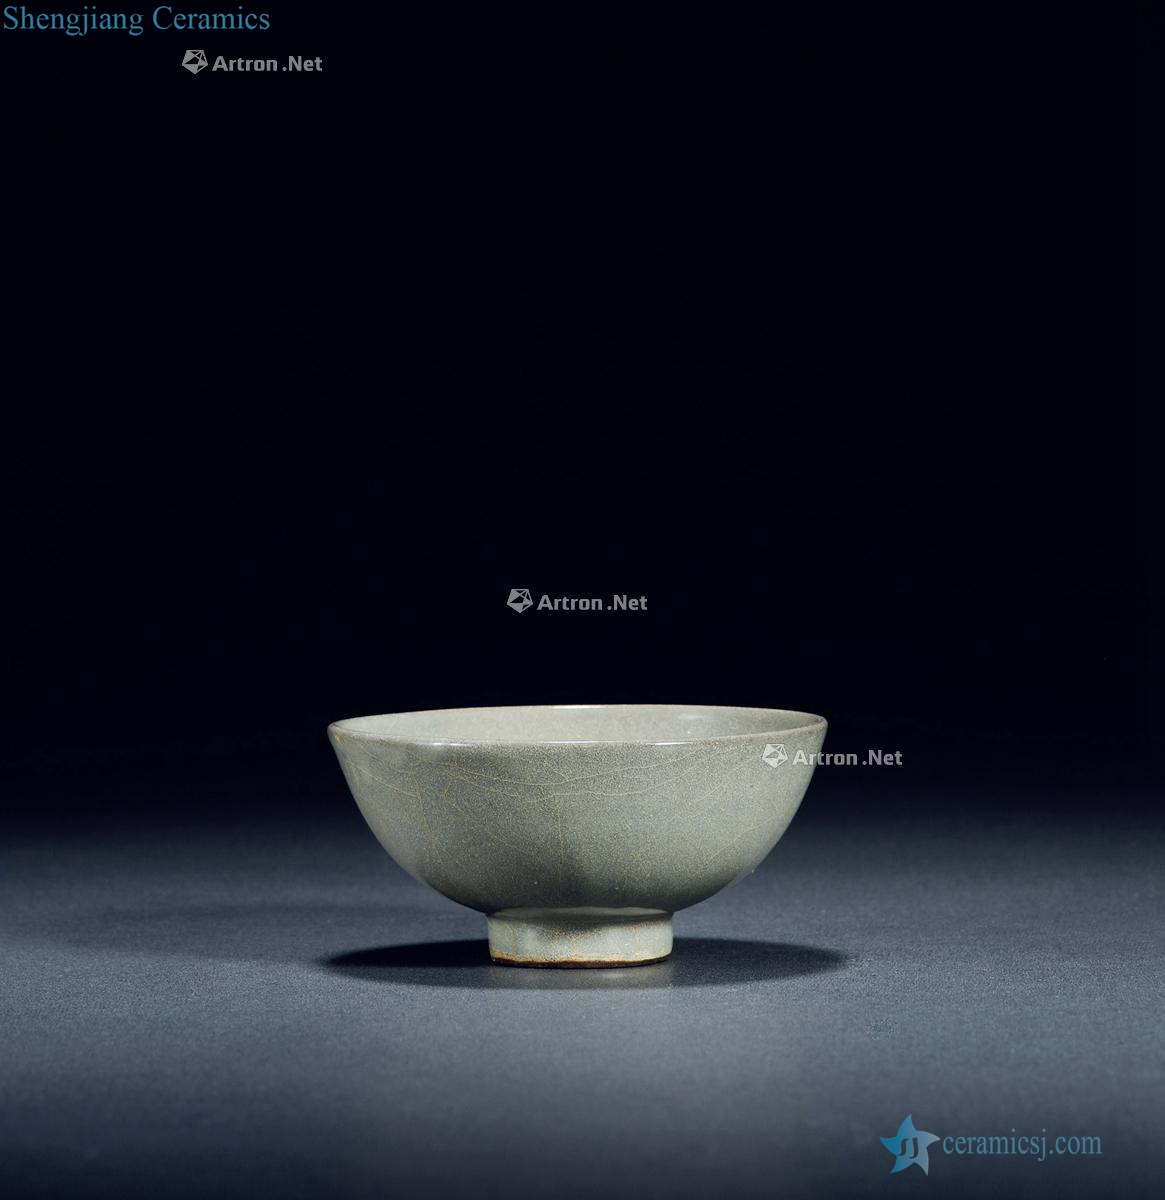 The southern song dynasty, longquan celadon imitation officer glazed lamp